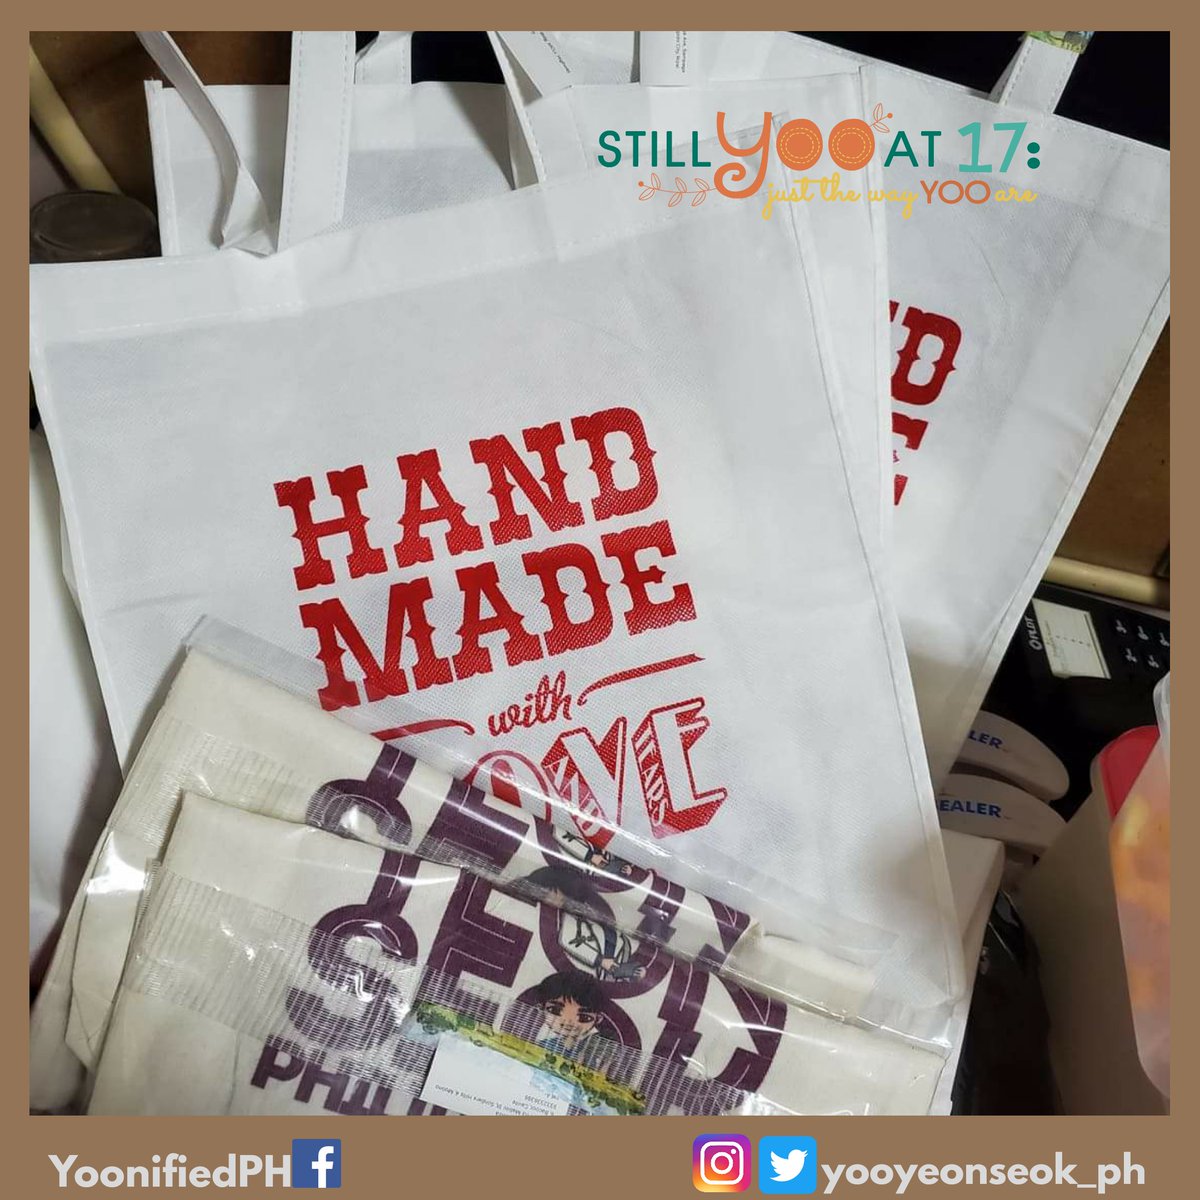  #StillYOOAt17 update: shipping team packing the first batch of orders  #YooYeonSeok  #Chilbong  #GuDongMae